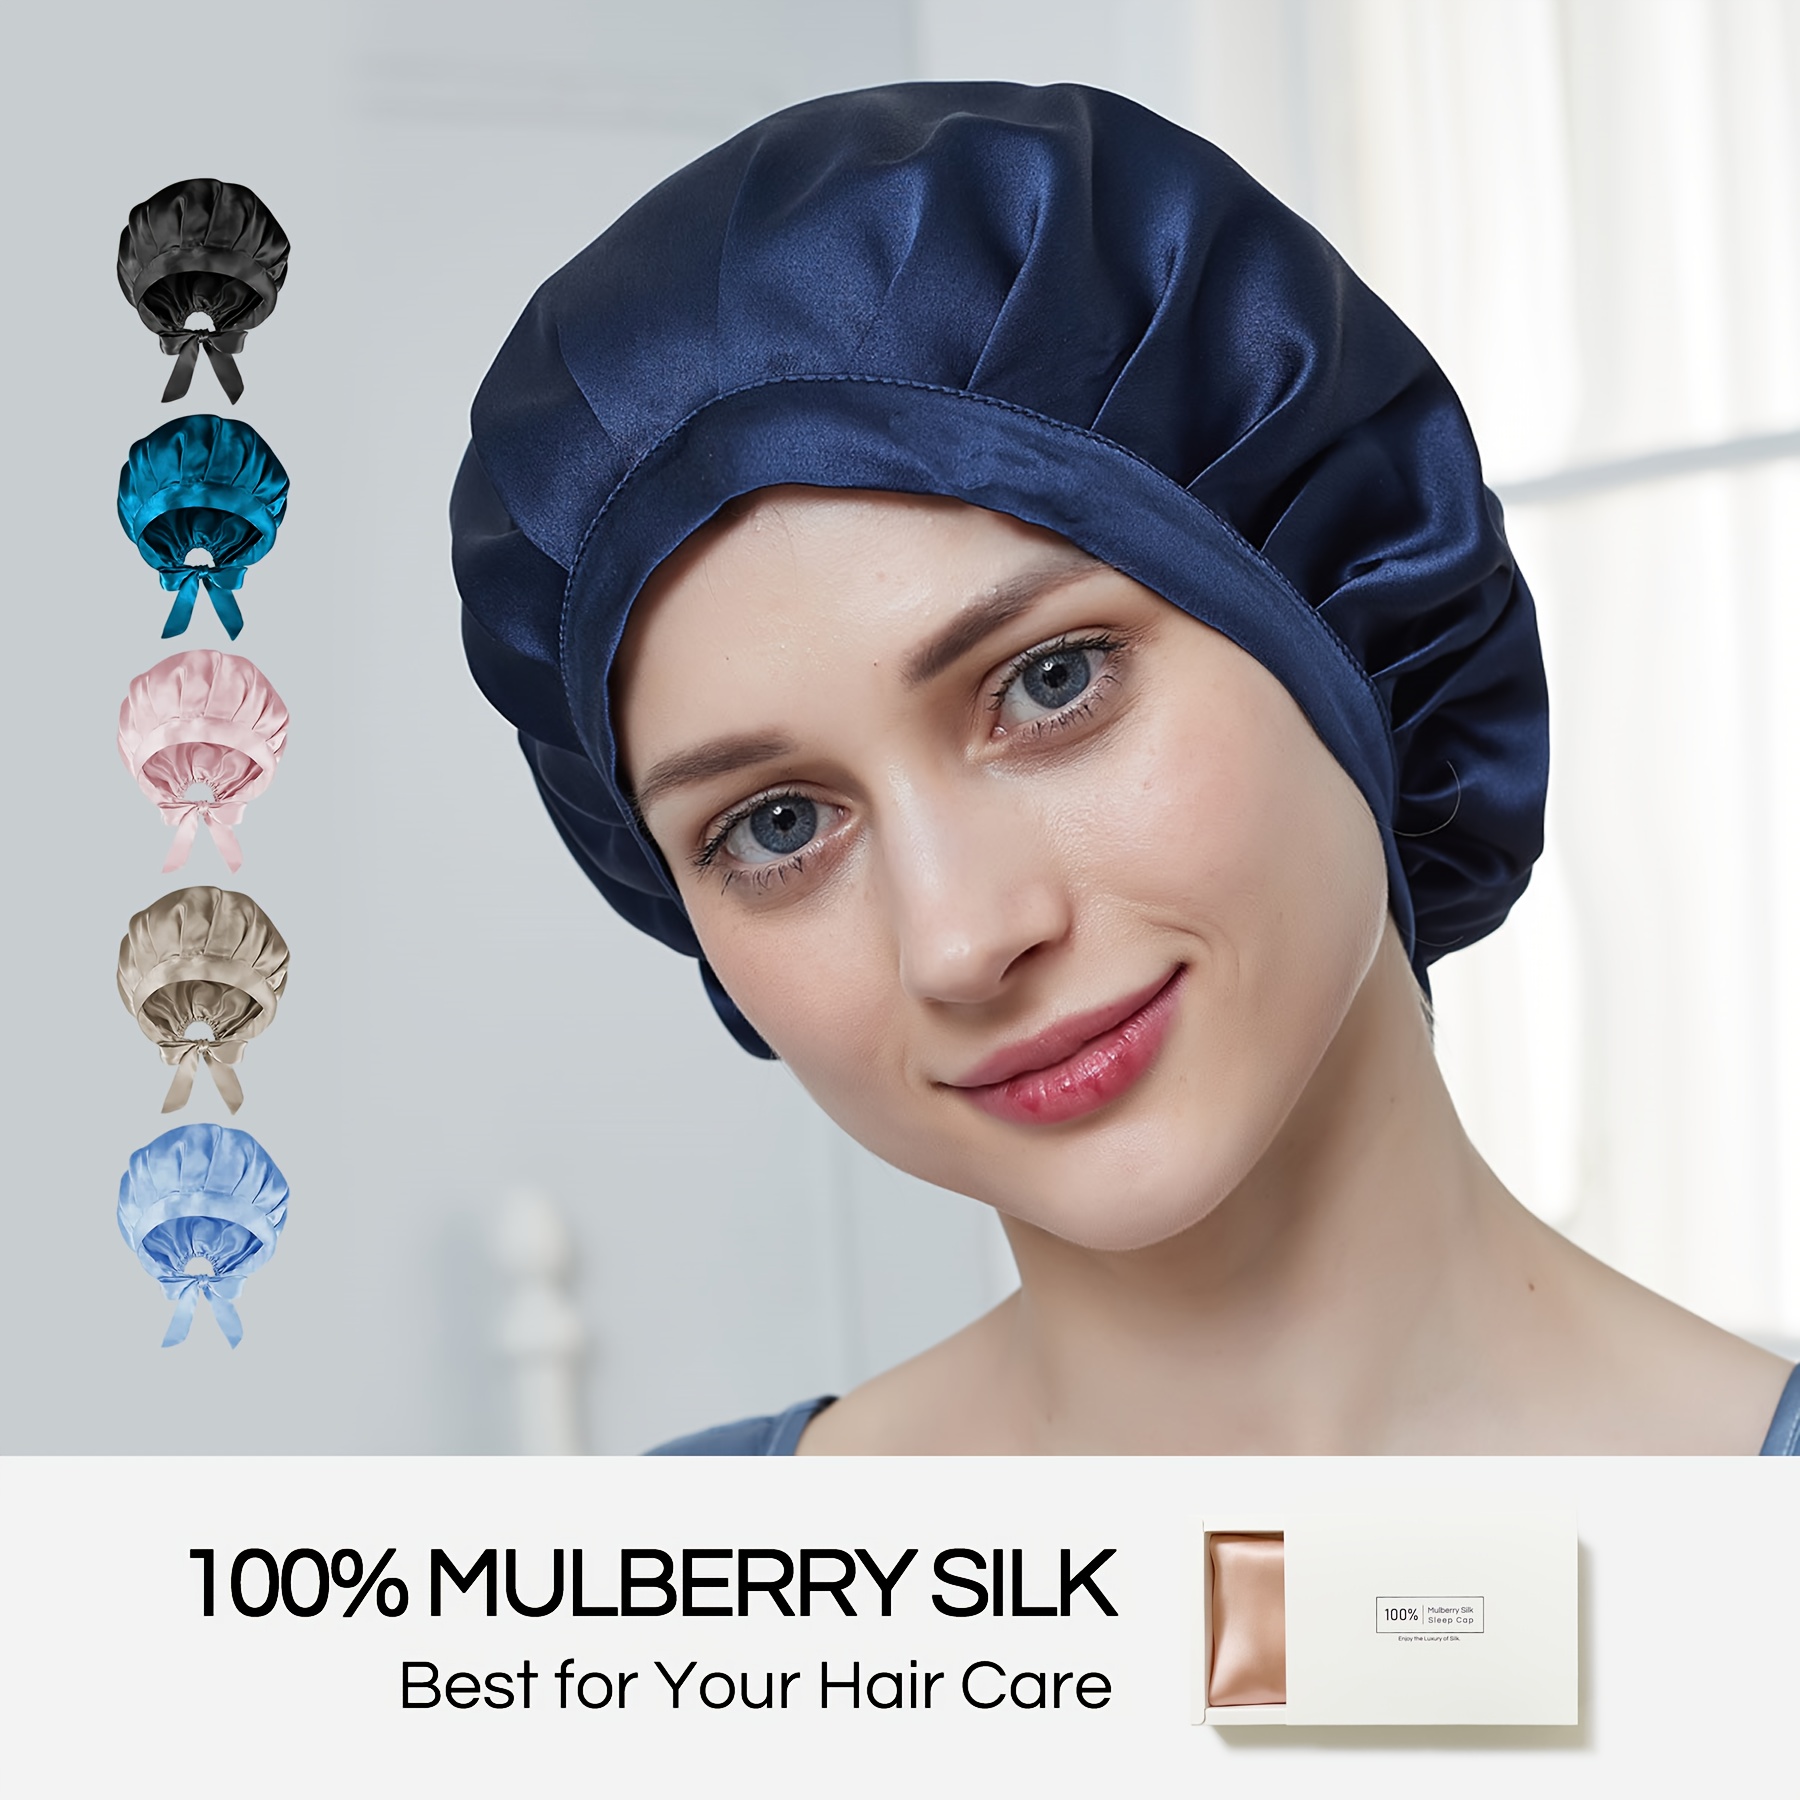 How to Care for Mulberry Silk